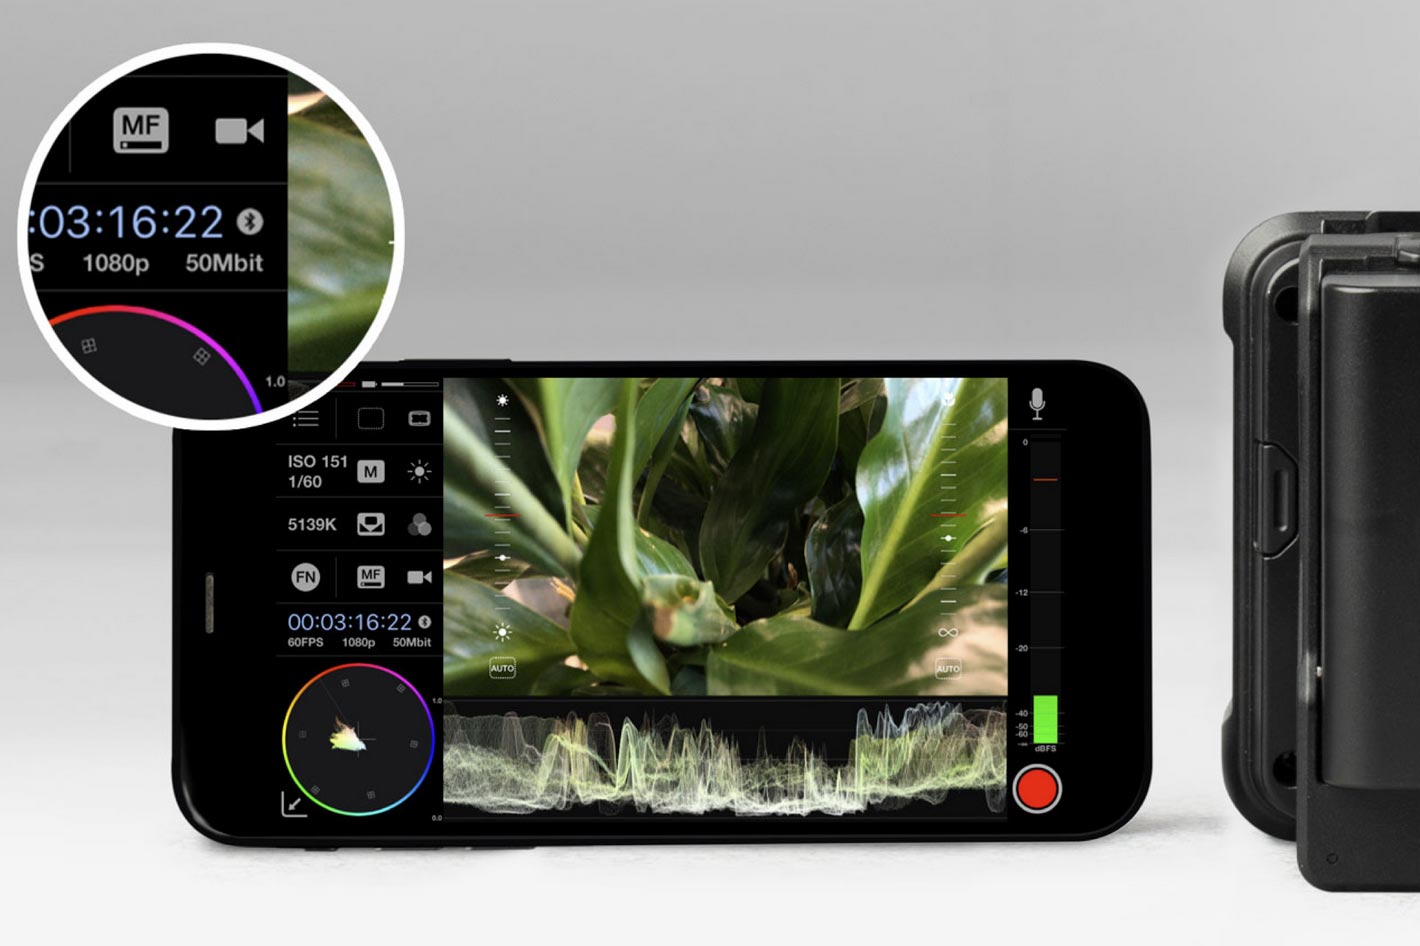 New AtomX SYNC: trouble-free multi-cam wireless timecode